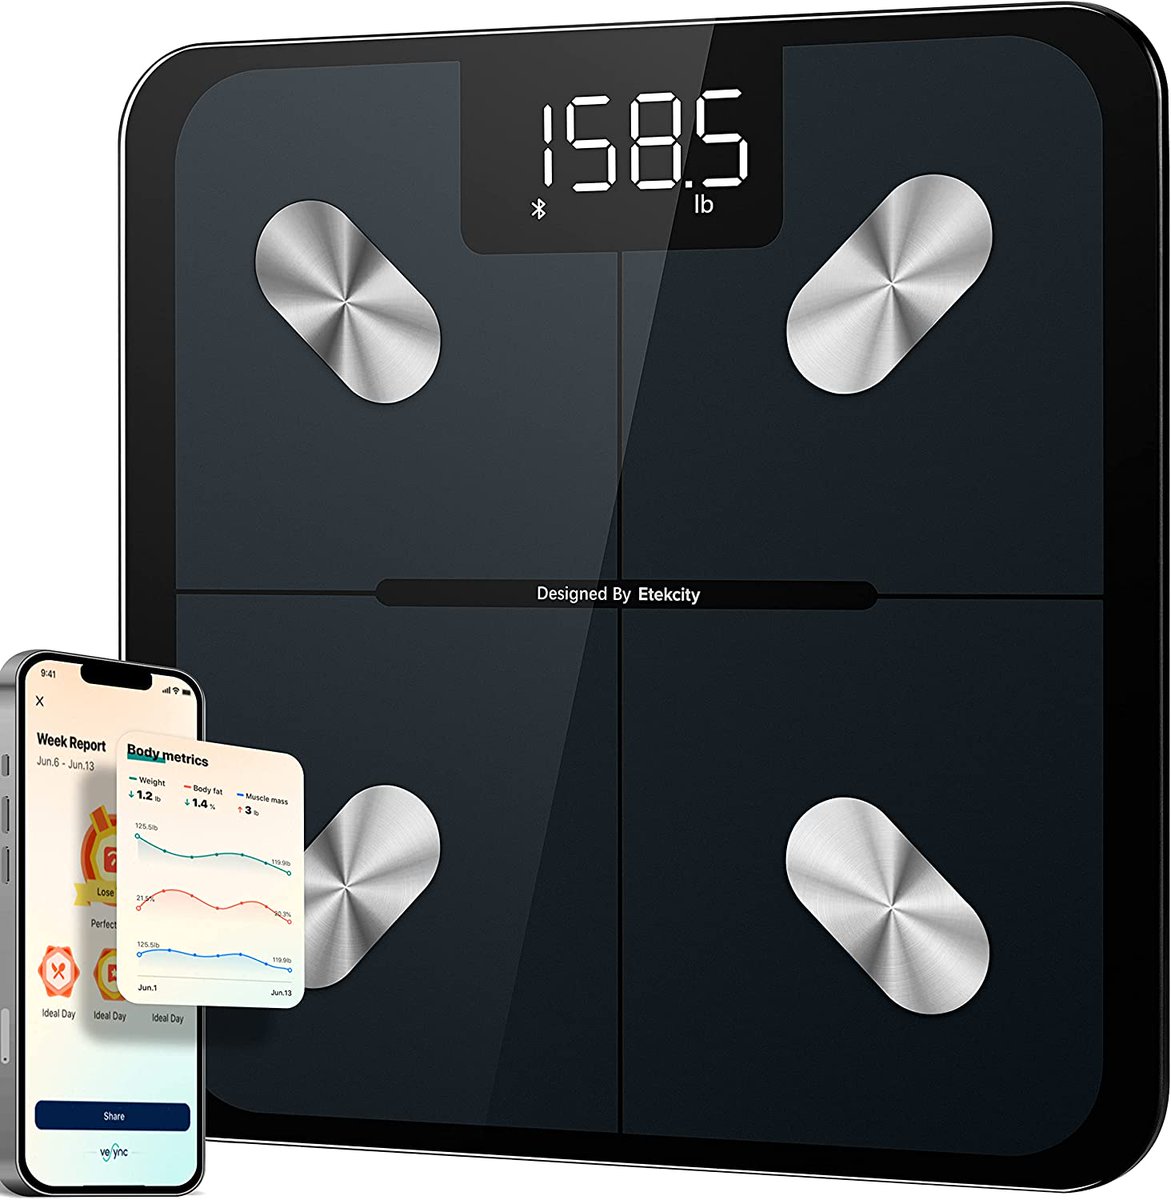 Etekcity Scale for Body Weight and Fat Percentage -- Save $8 -- JUST $21.99

amzn.to/3W4zUgS

#scale #scales #scaledeals #scaledeal #bodyscale #weightscale #weightscales #healthdeals #health #beautydeals #beauty #weight #bodyweight #bmi #bodyscales #bodyweightscale